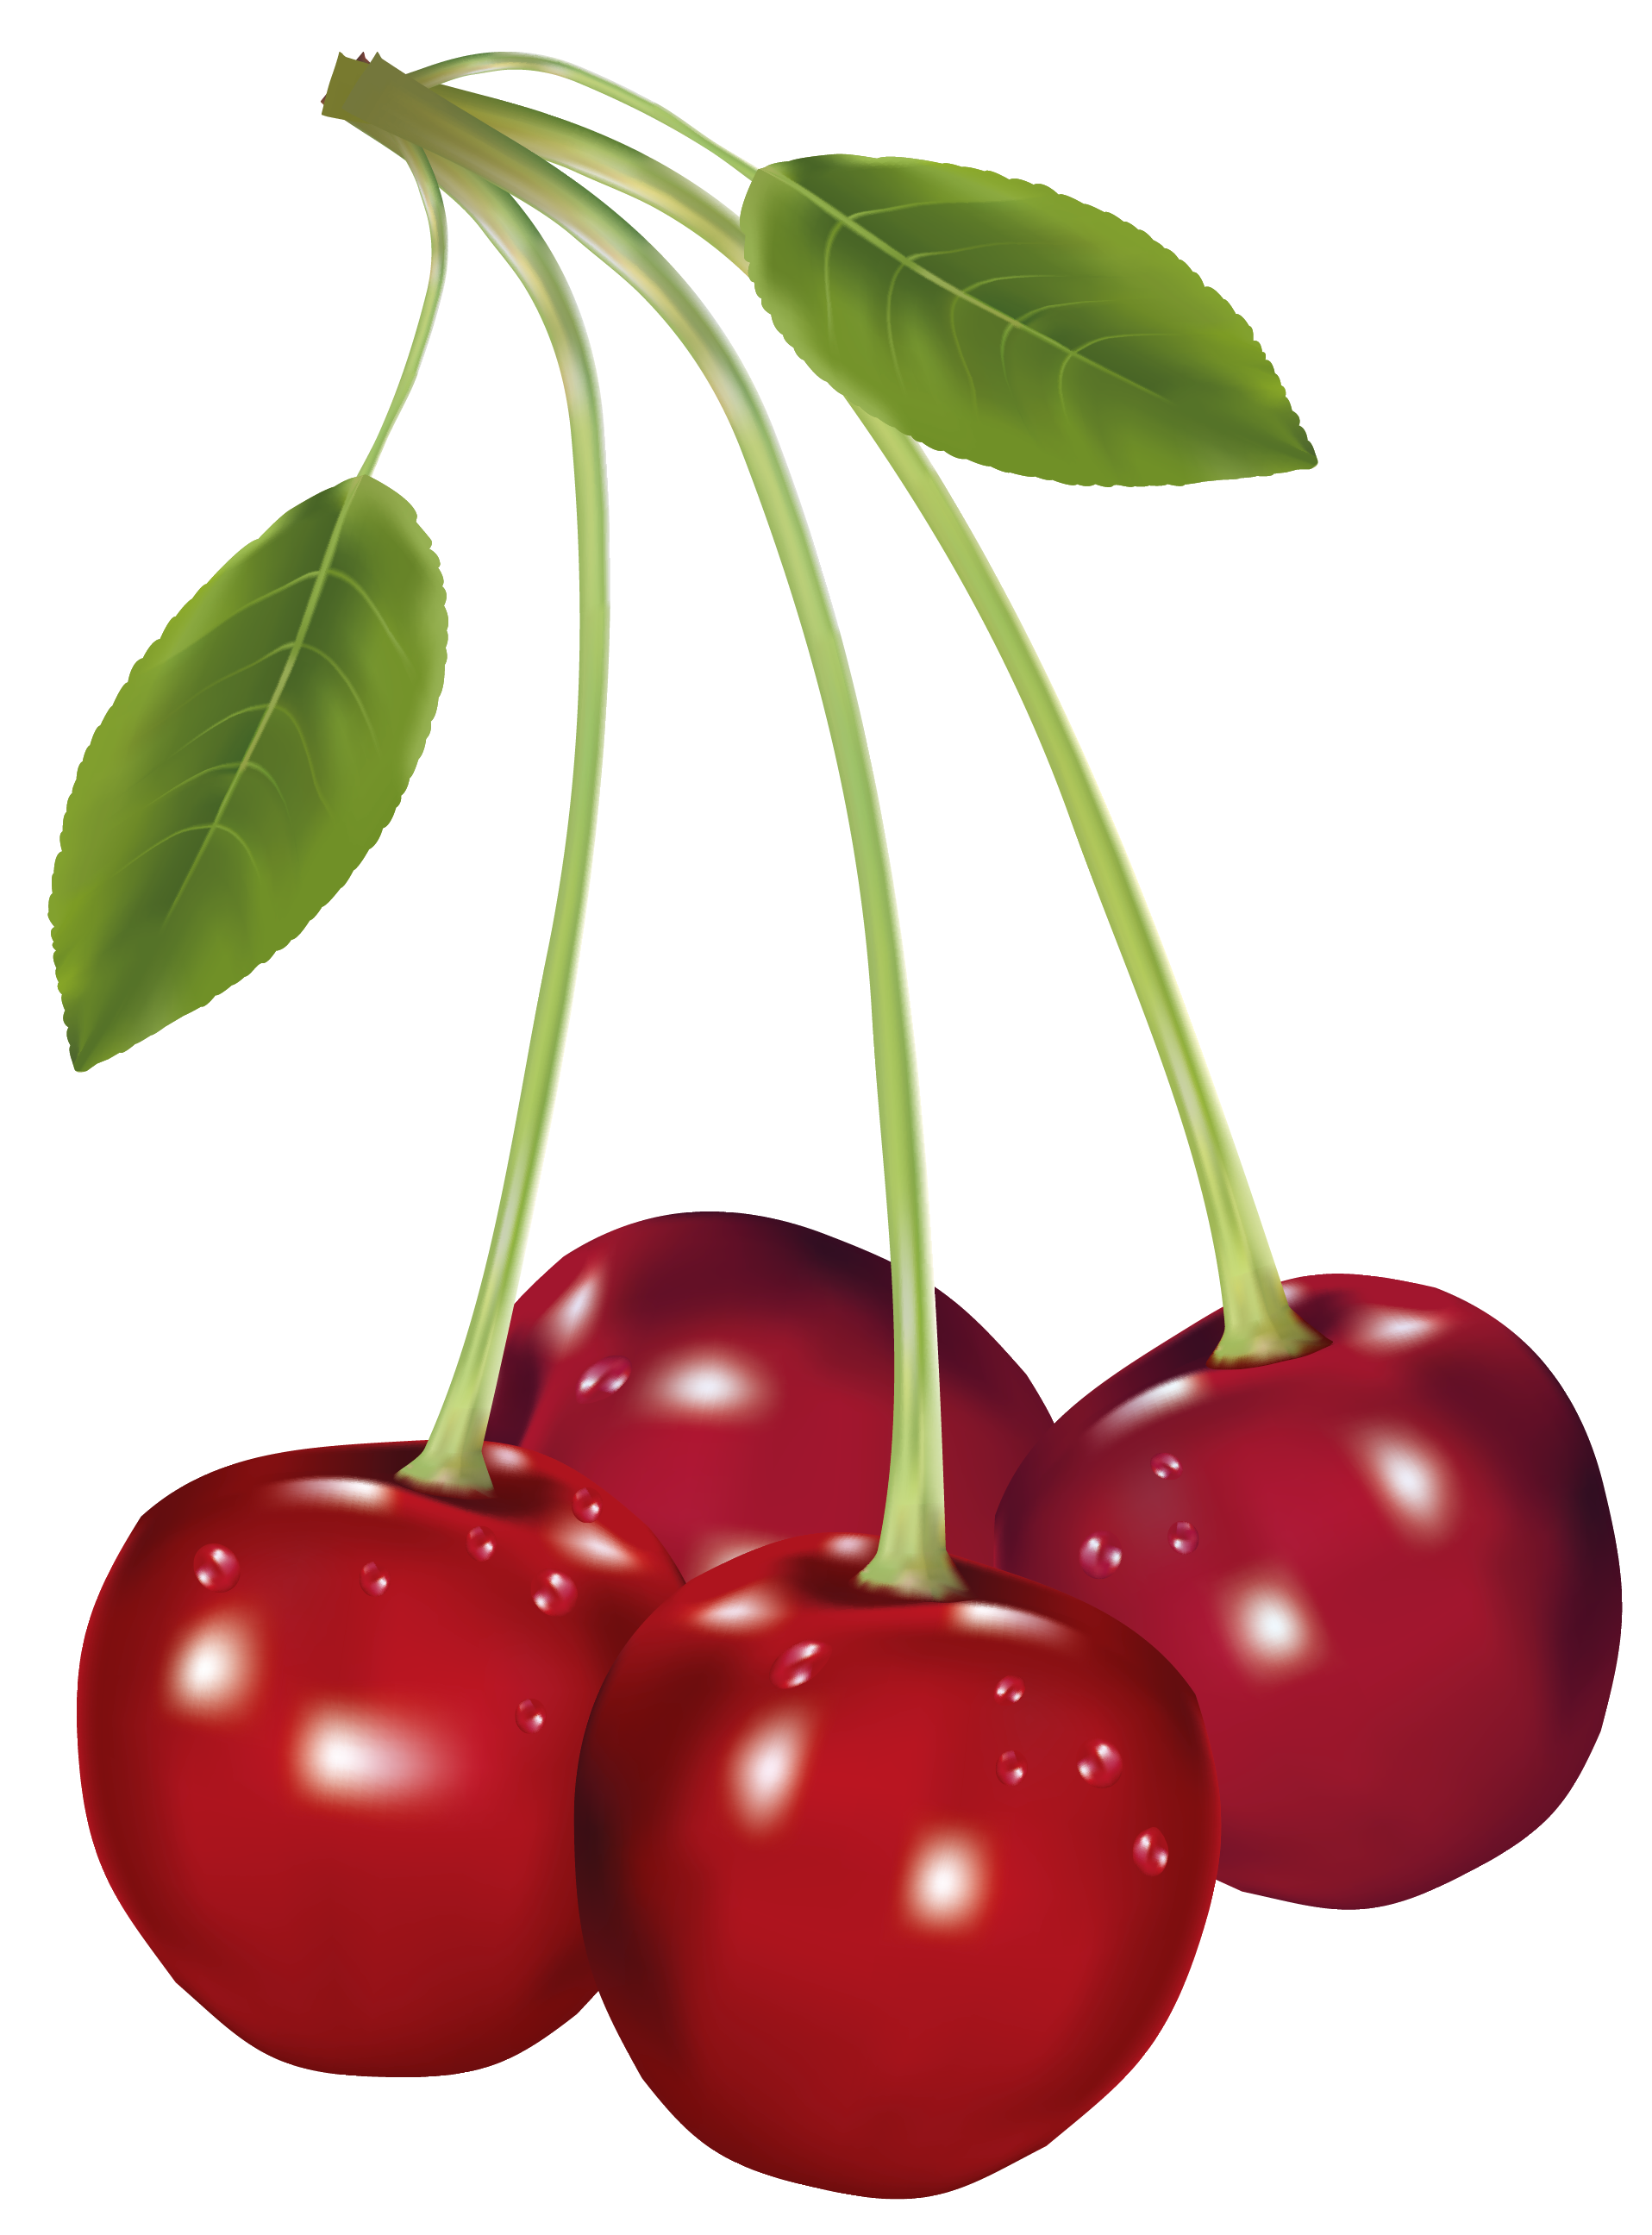 Mango clipart cherry. Cherries png picture gallery